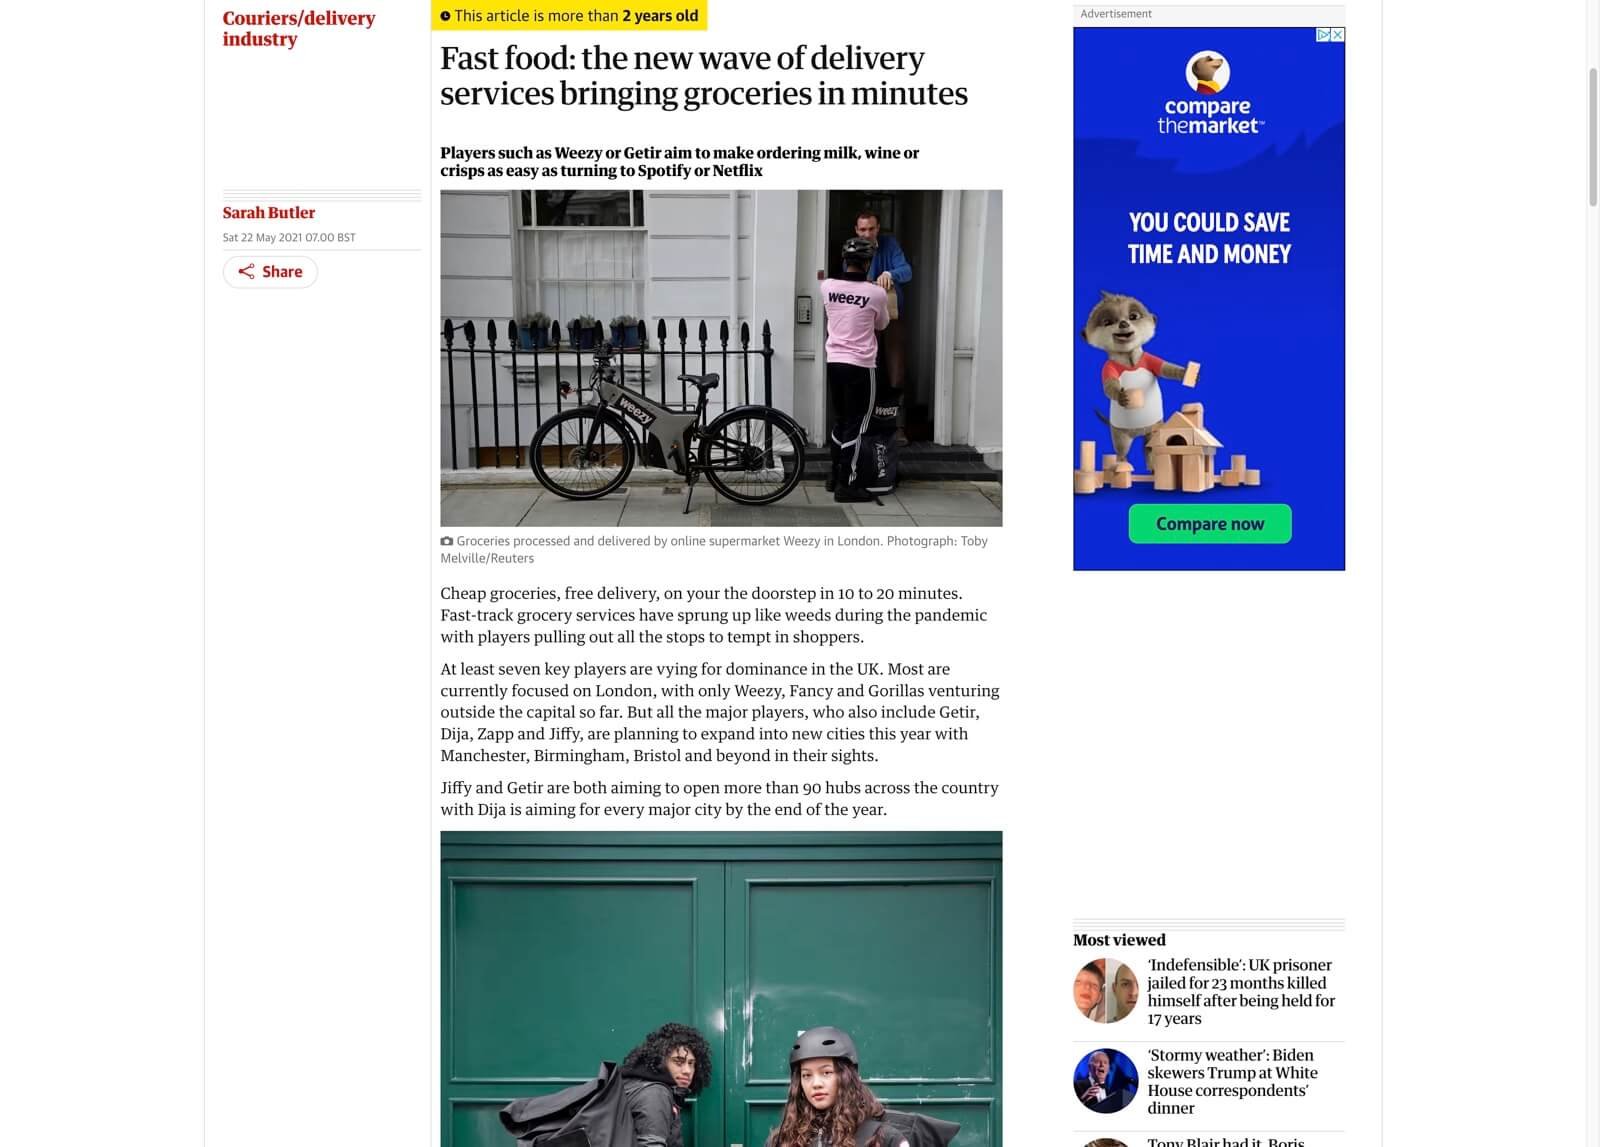 The-Guardian-Fast-food-the-new-wave-of-delivery-services-bringing-groceries-in-minutes-Couriers-delivery-industry-The-Guardian.jpg